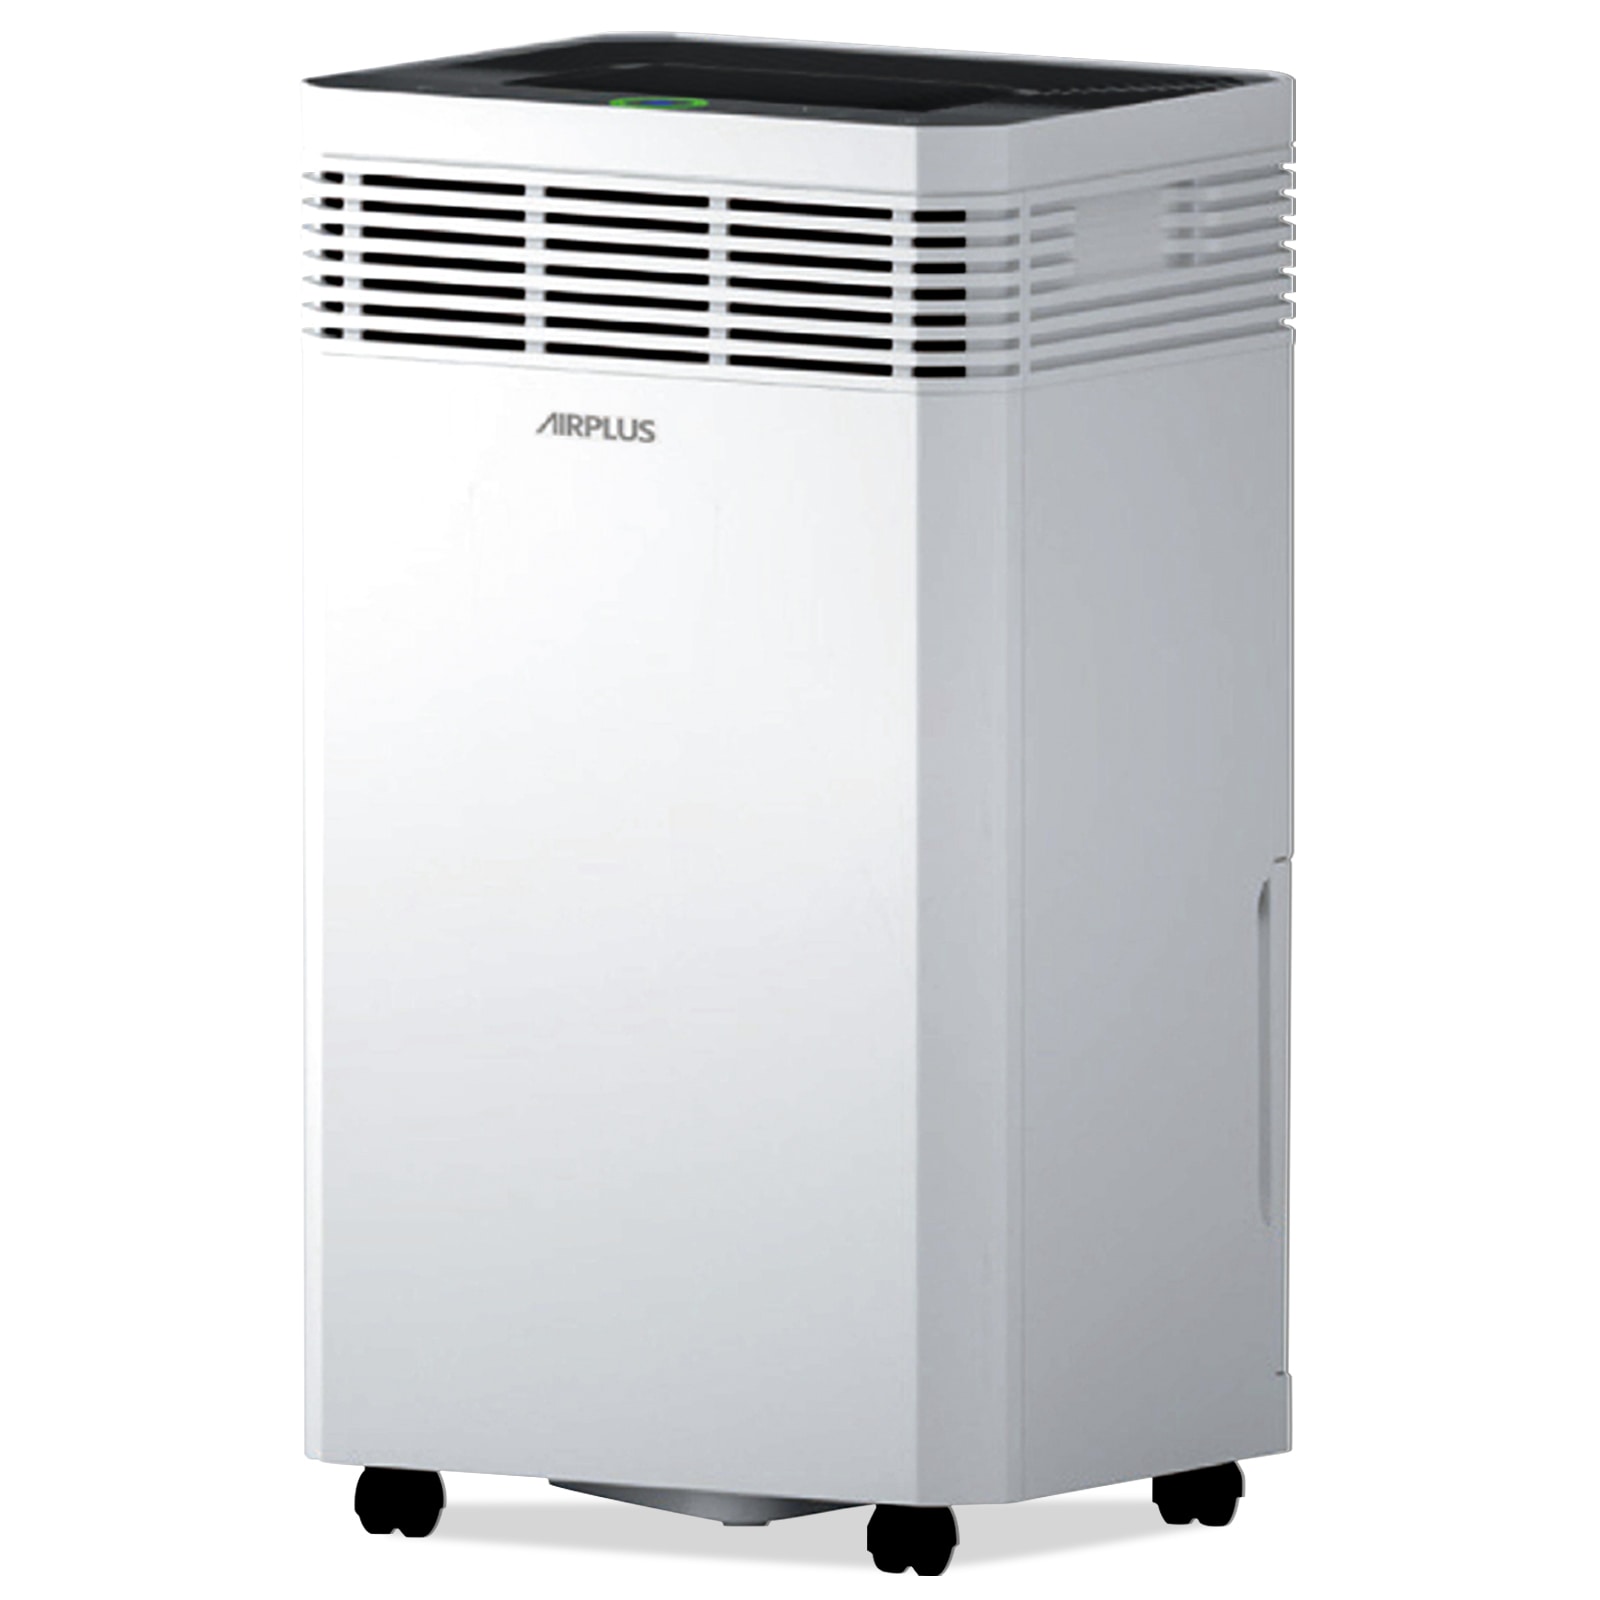 AIRPLUS 125-Pint 3-Speed Dehumidifier with Built-In Pump ENERGY 